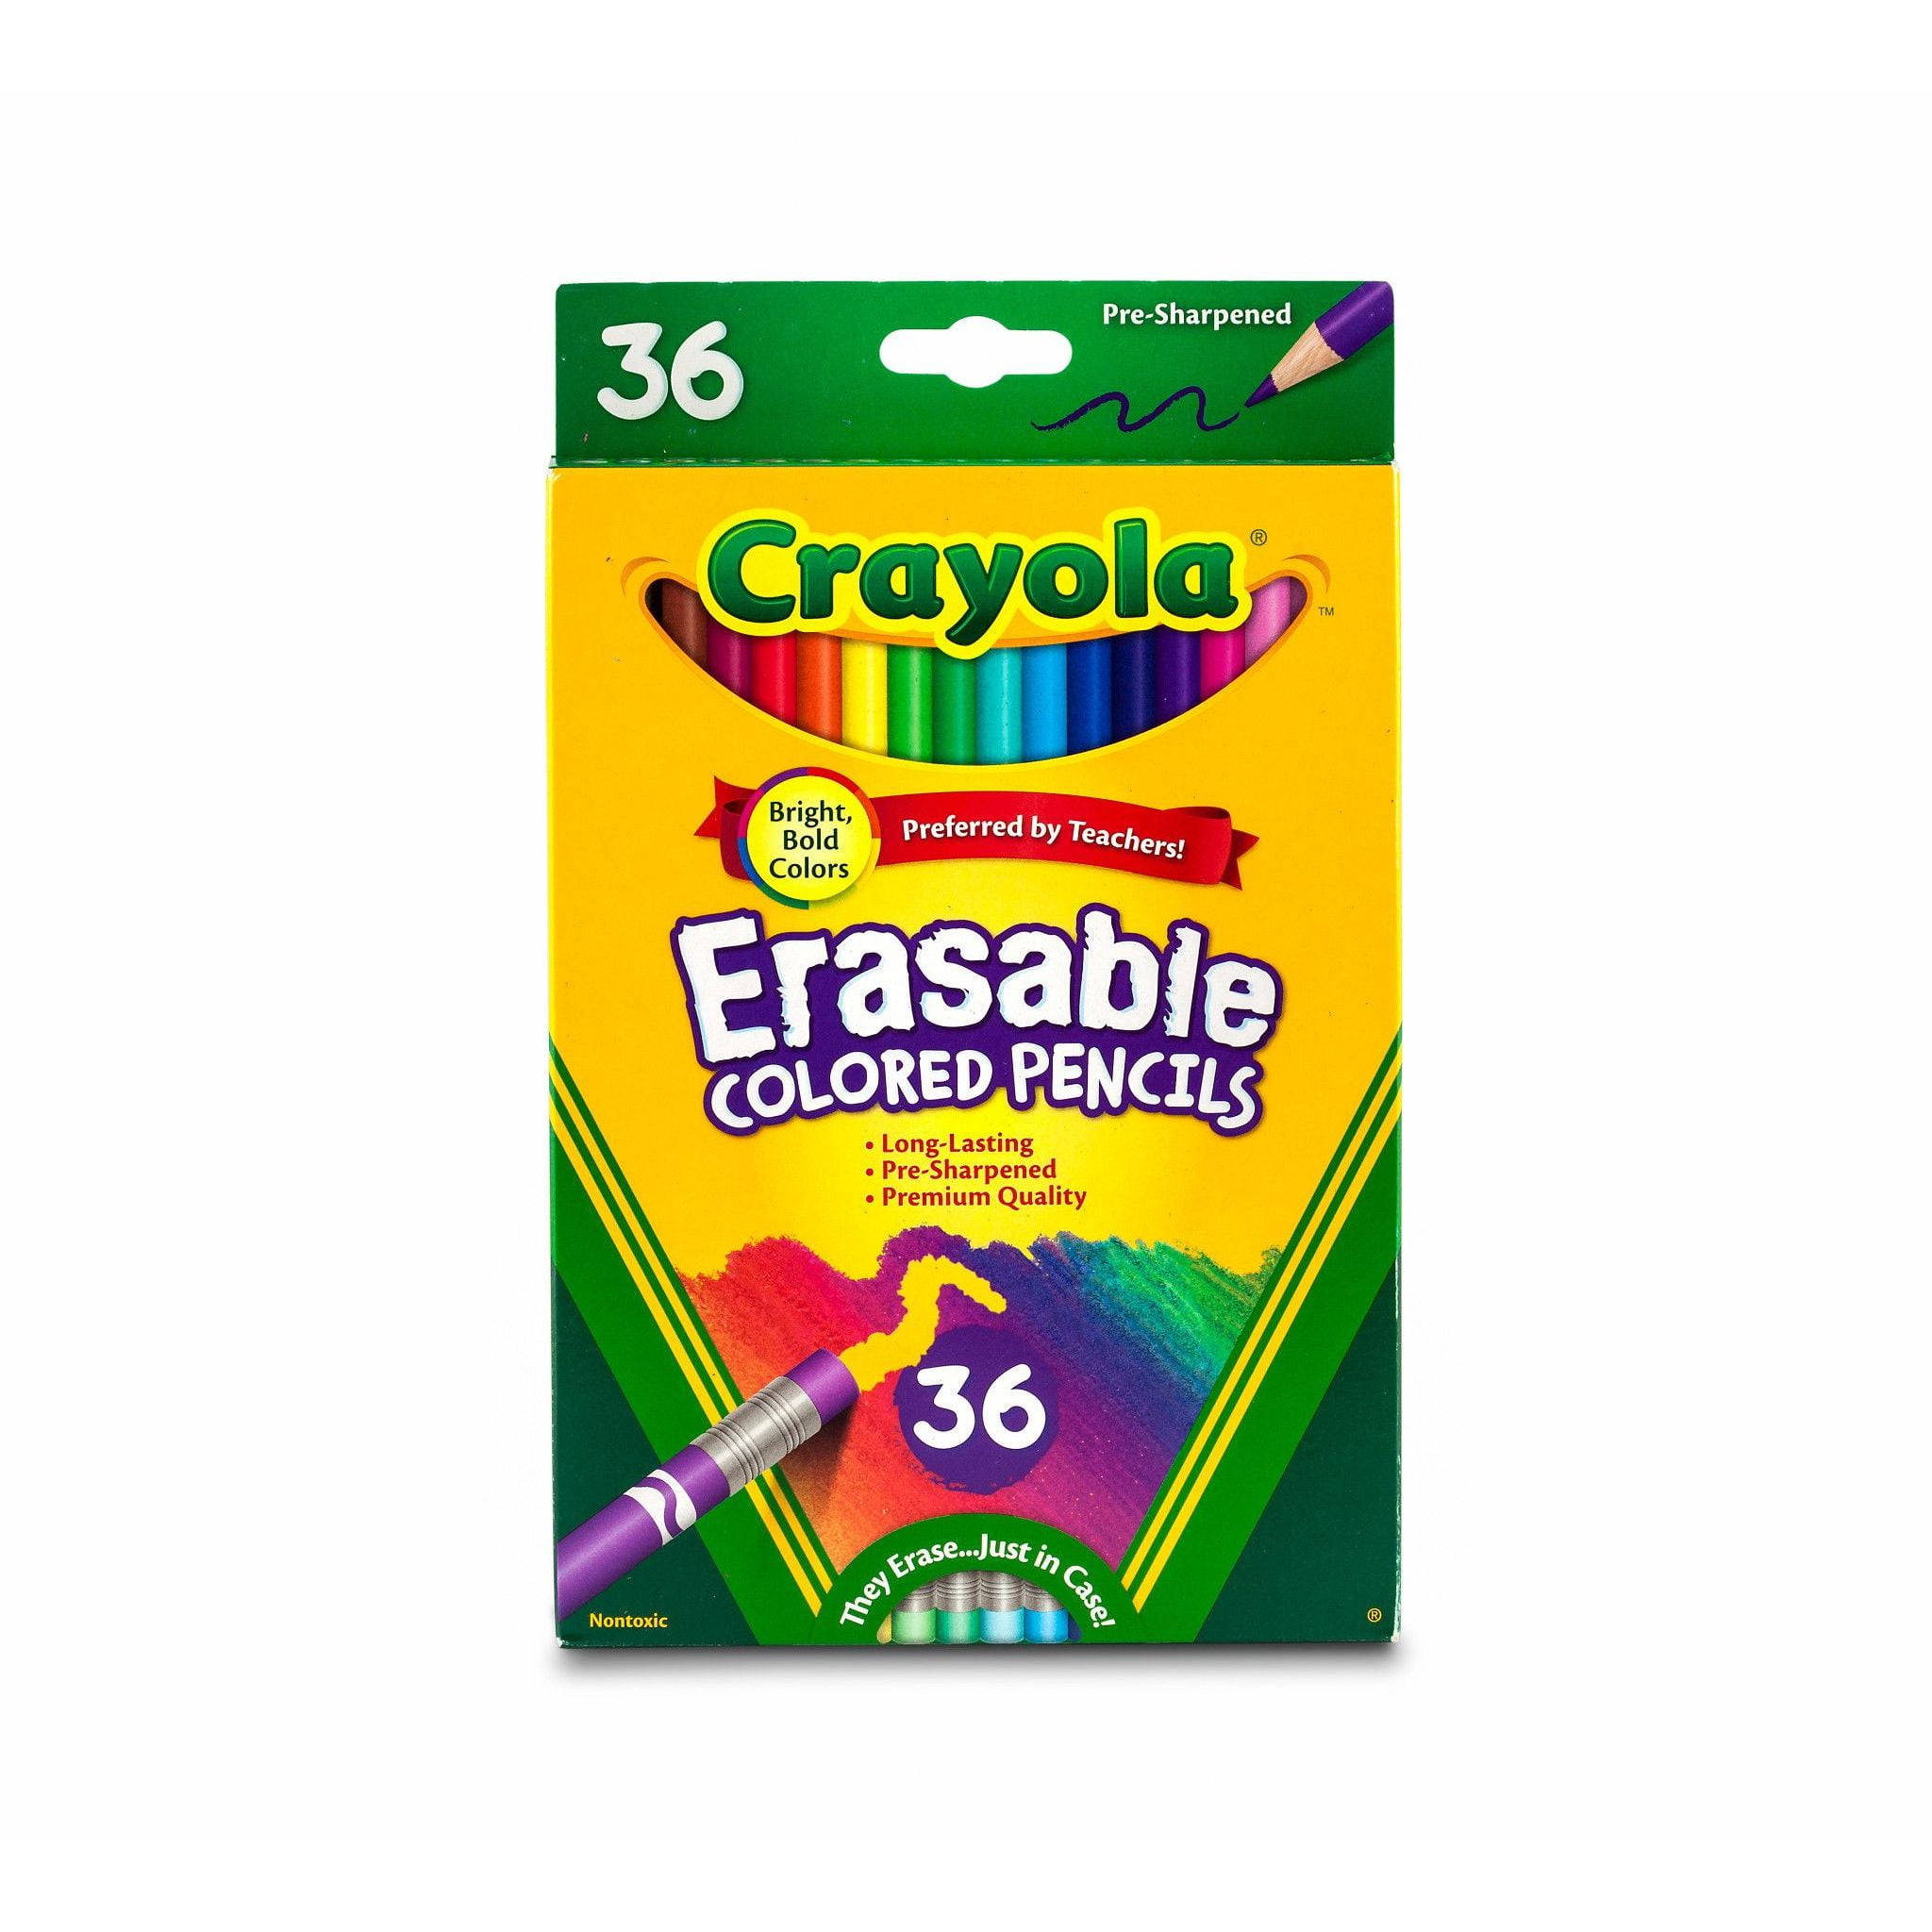 Crayola Erasable Colored Pencil - Get Great Value, Give to your Cause! –  www.